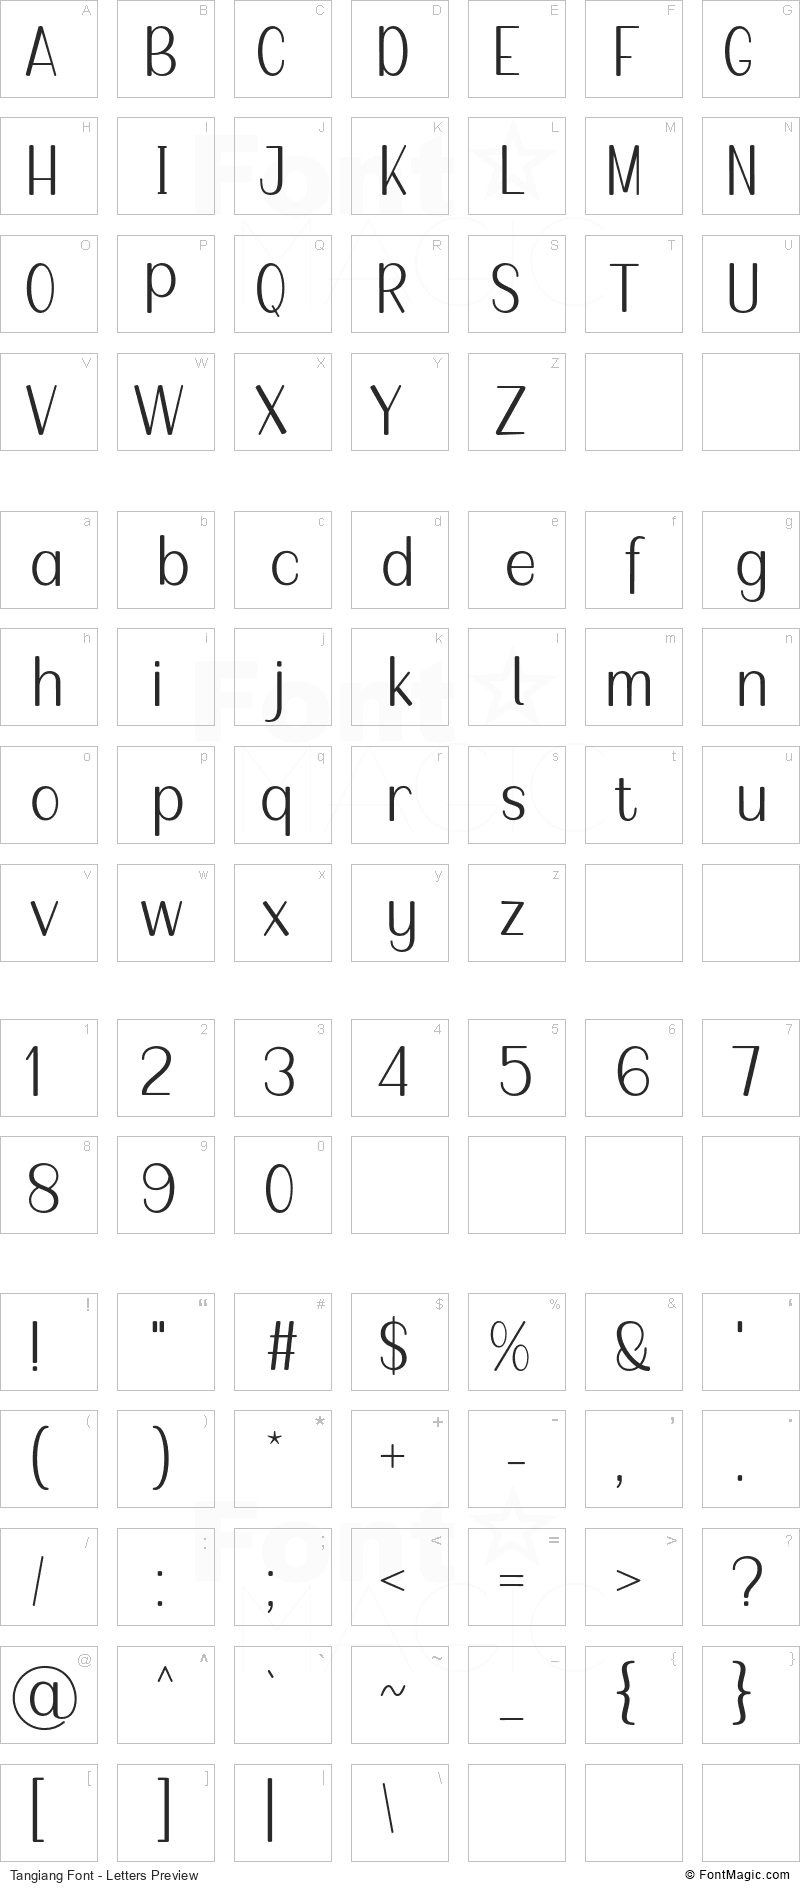 Tangiang Font - All Latters Preview Chart